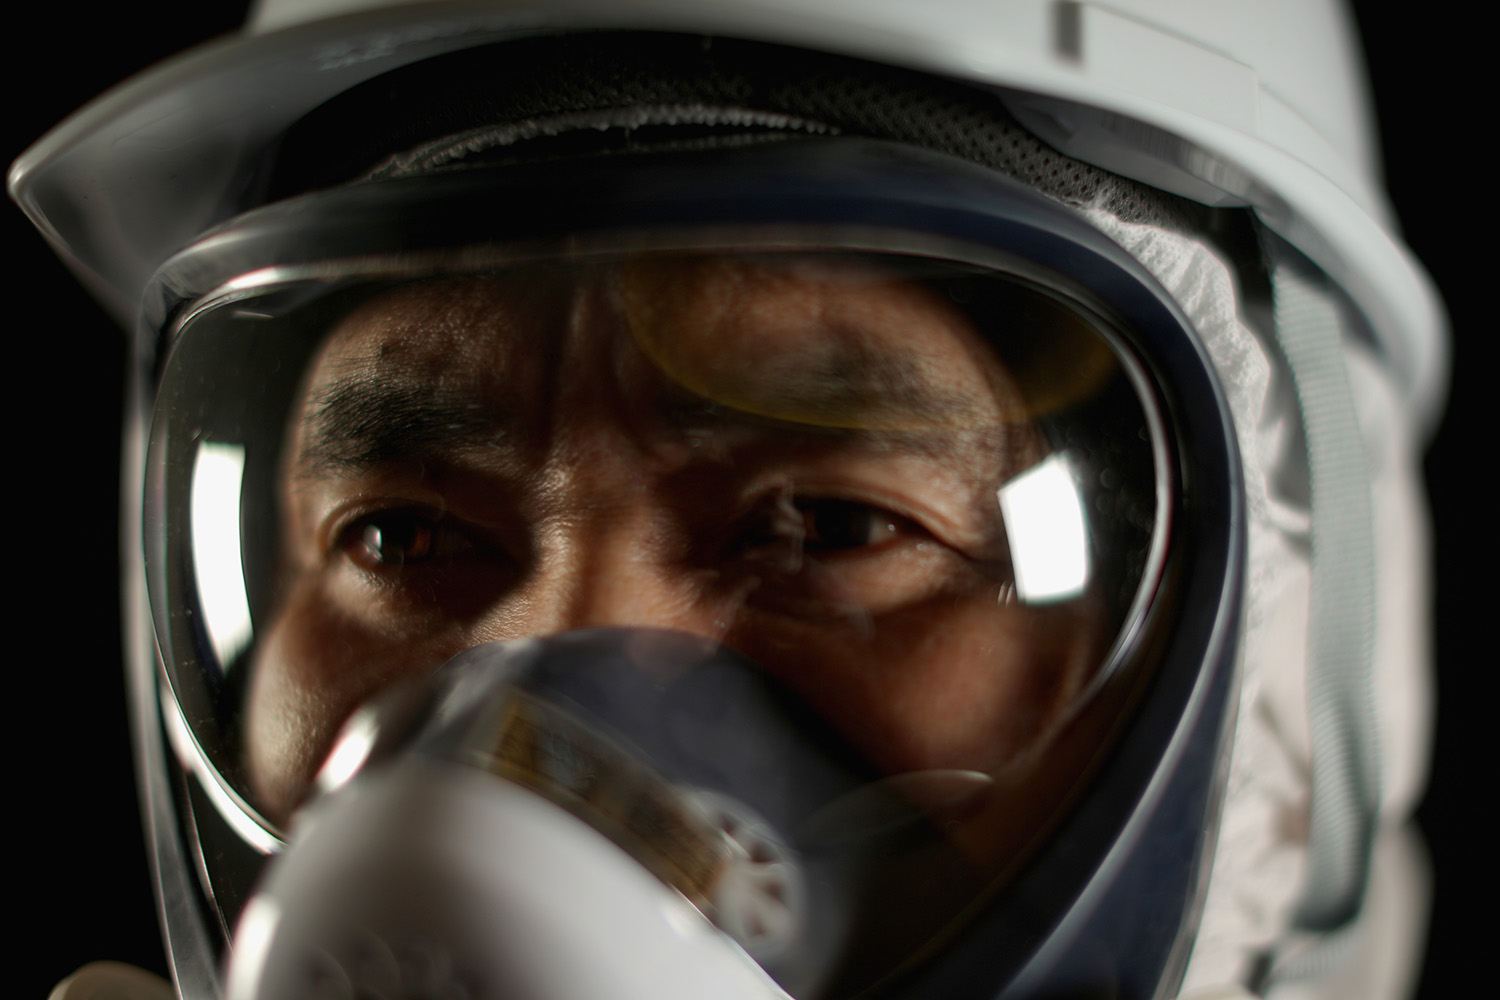 Fukushima Workers Don Their Protective Gear In These Eerie Portraits From The Exclusion Zone